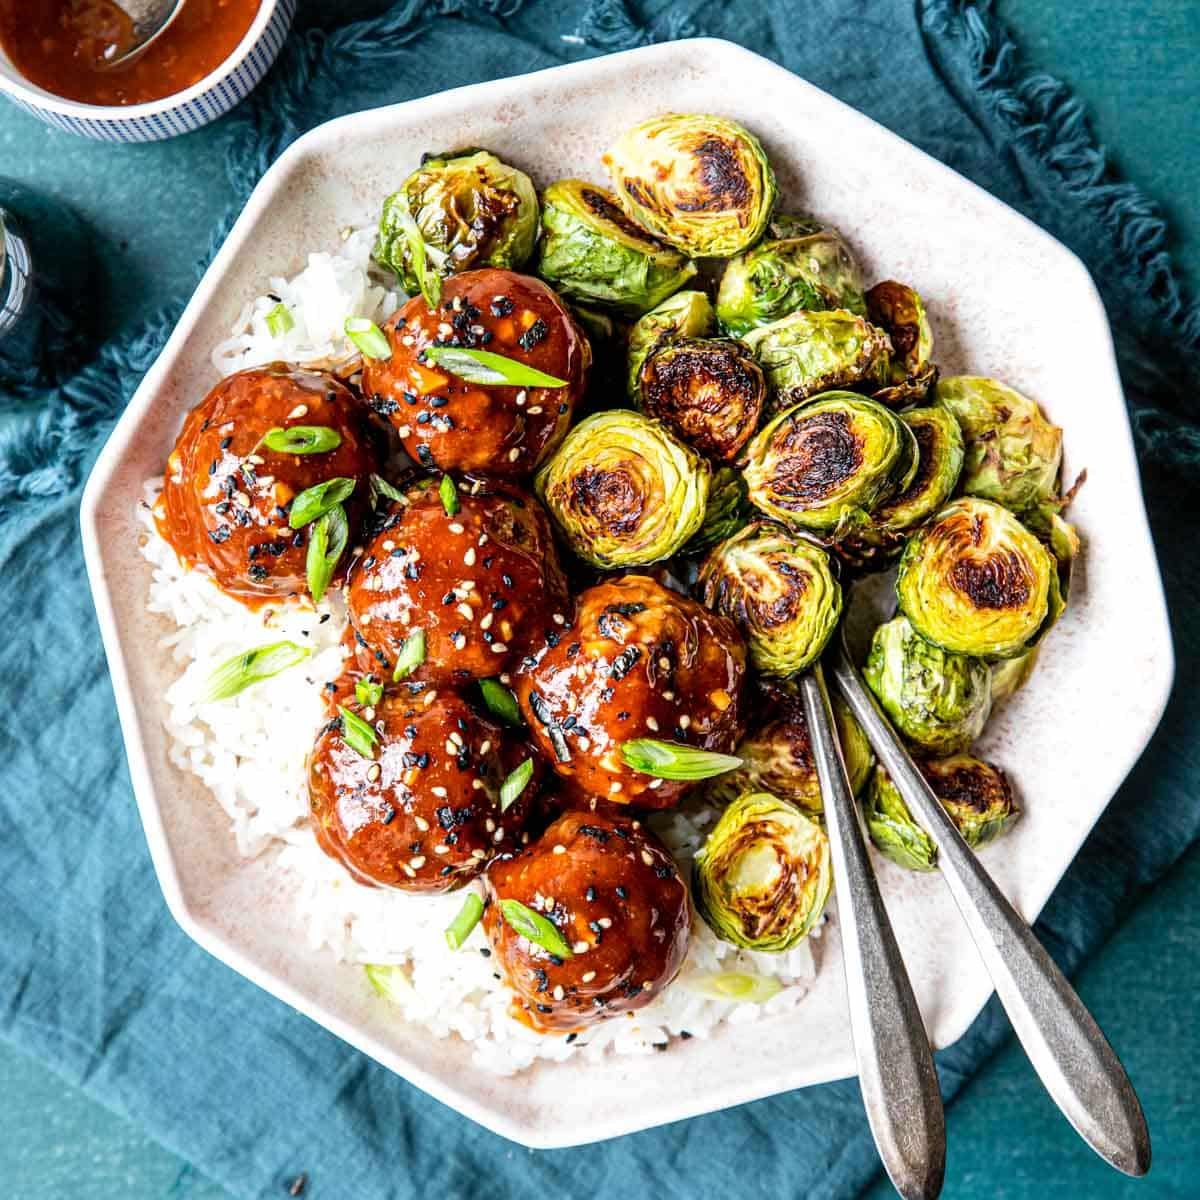 Sticky Asian Meatballs over rice with brussels sprouts on the side